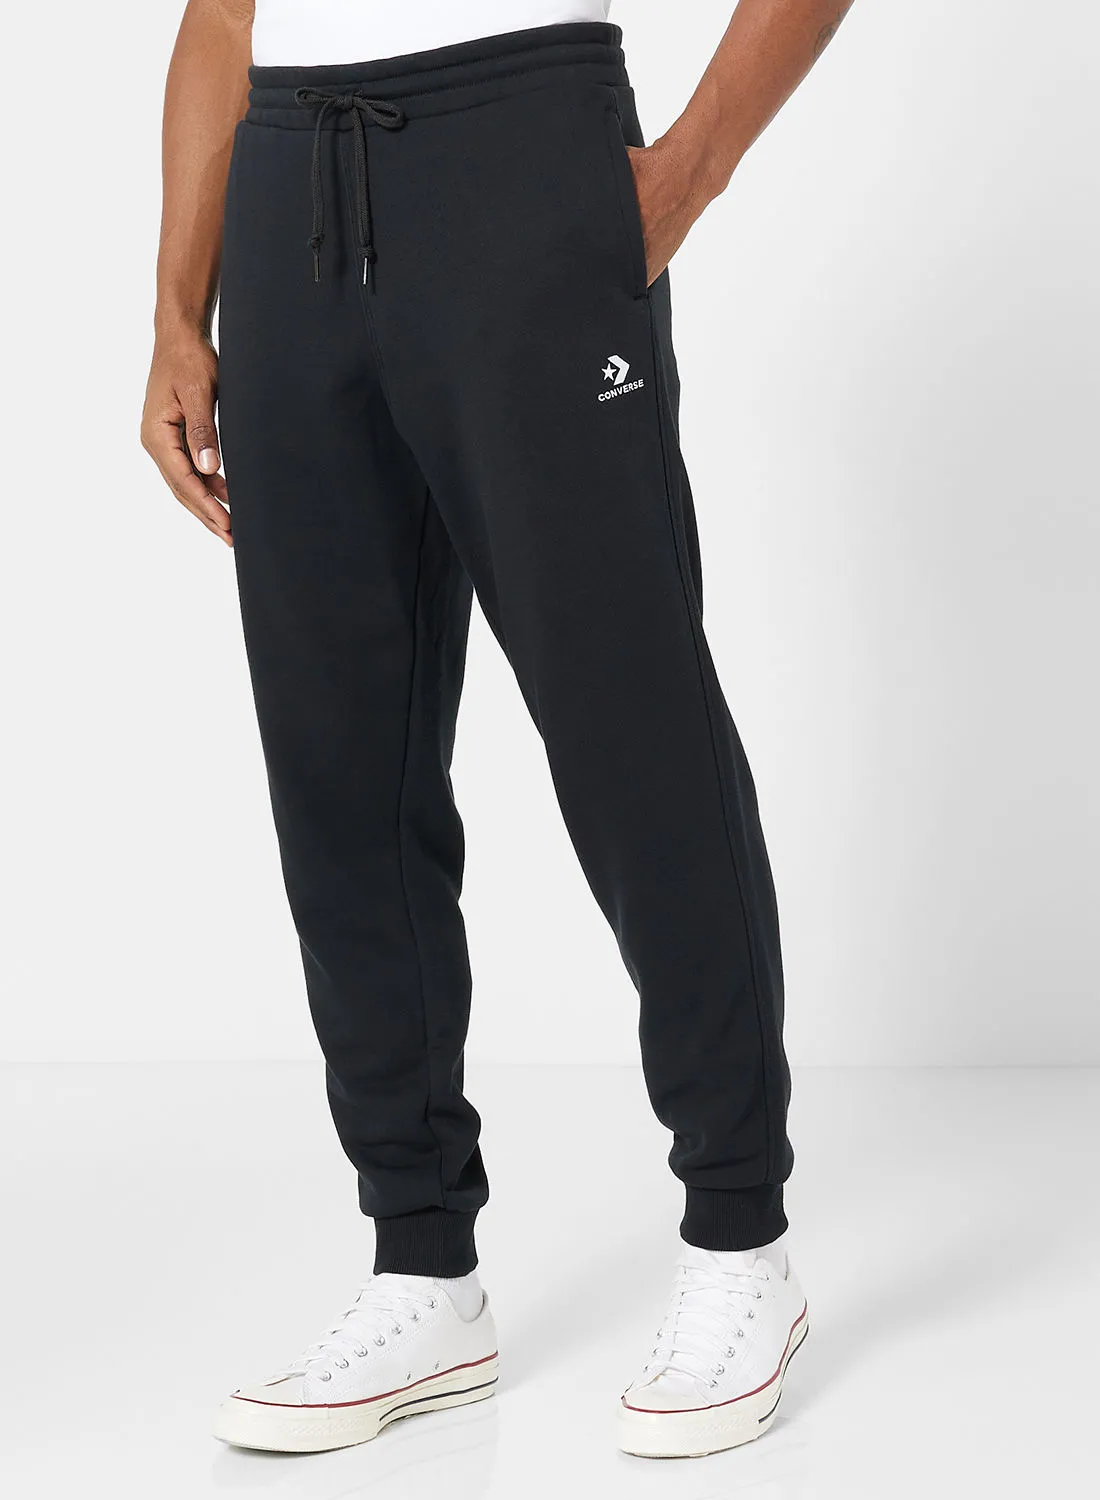 CONVERSE Embroidered Star Sweatpants Black